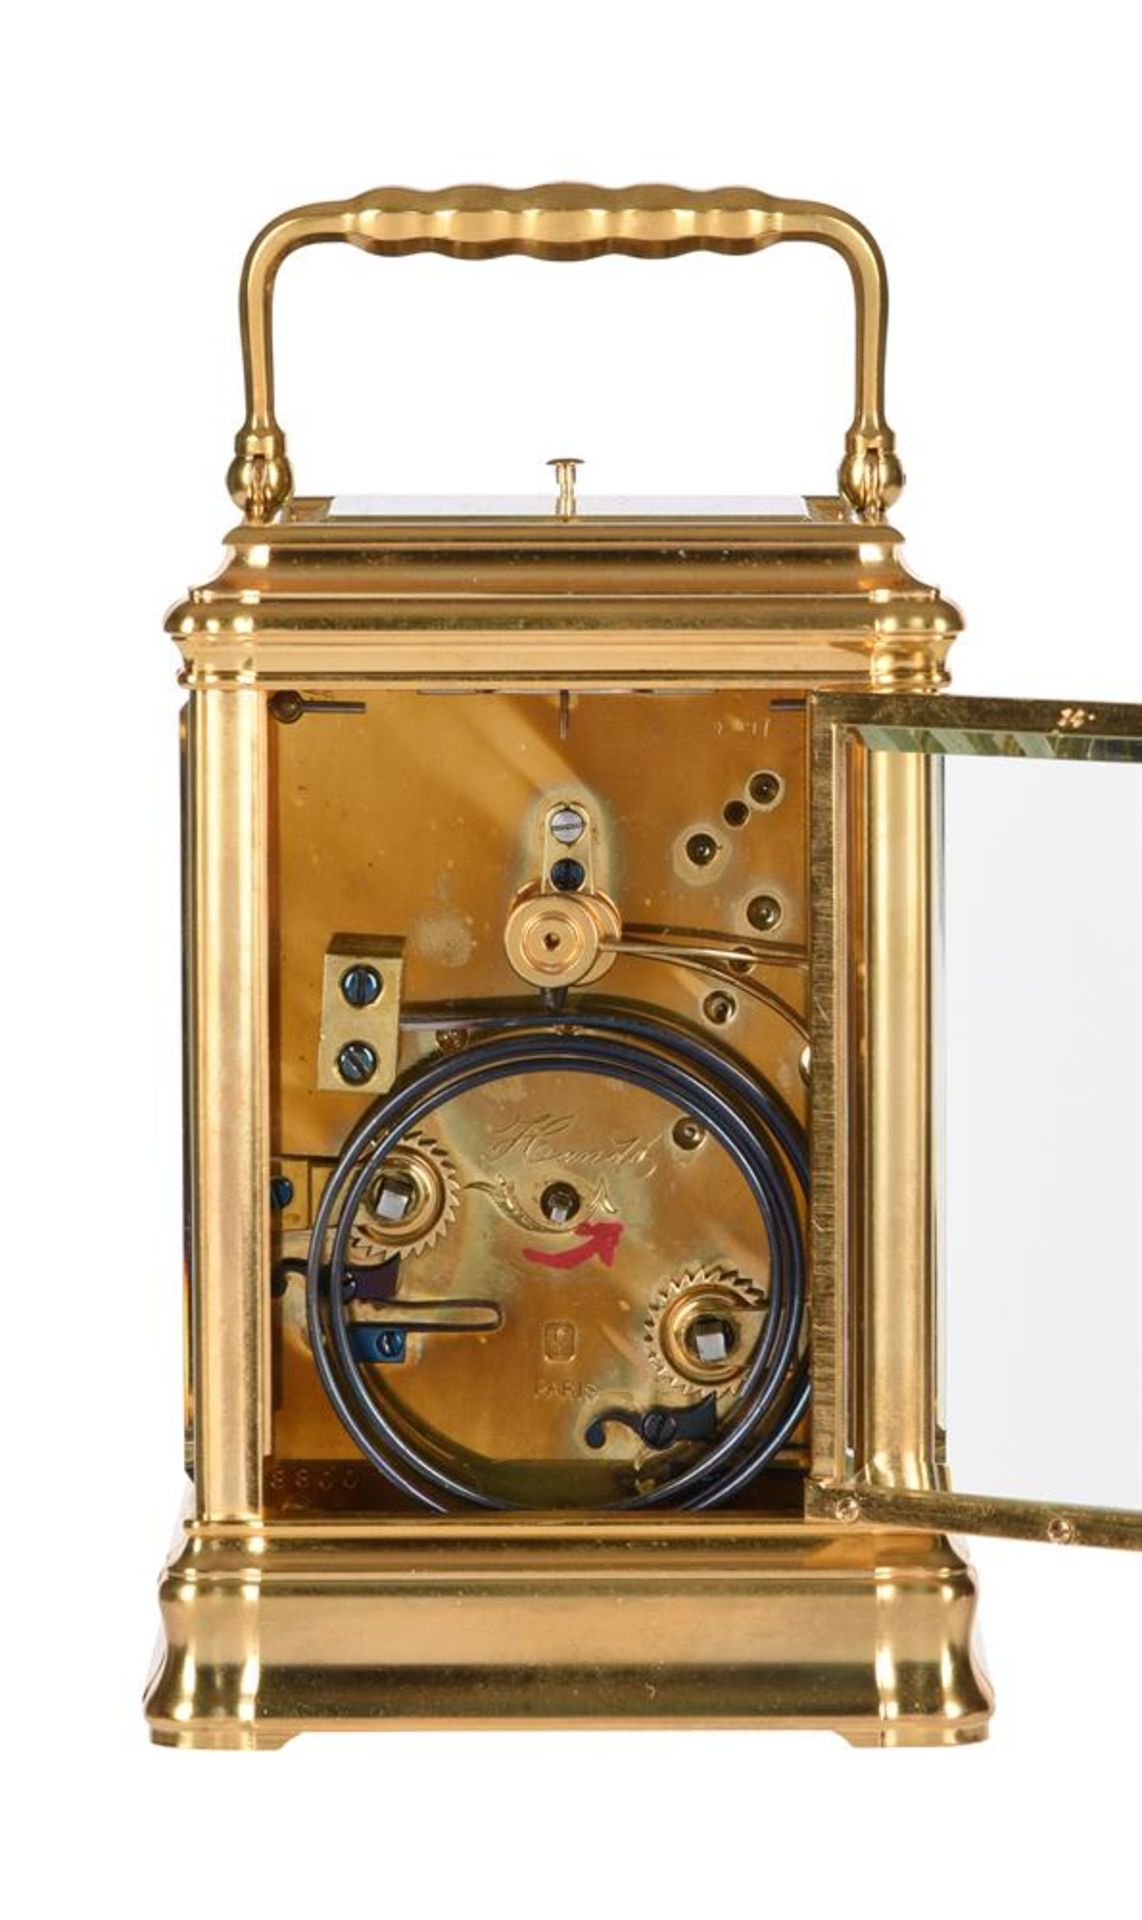 A FINE FRENCH GILT BRASS GORGE CASED GRANDE SONNERIE STRIKING CARRIAGE CLOCK - Image 3 of 6